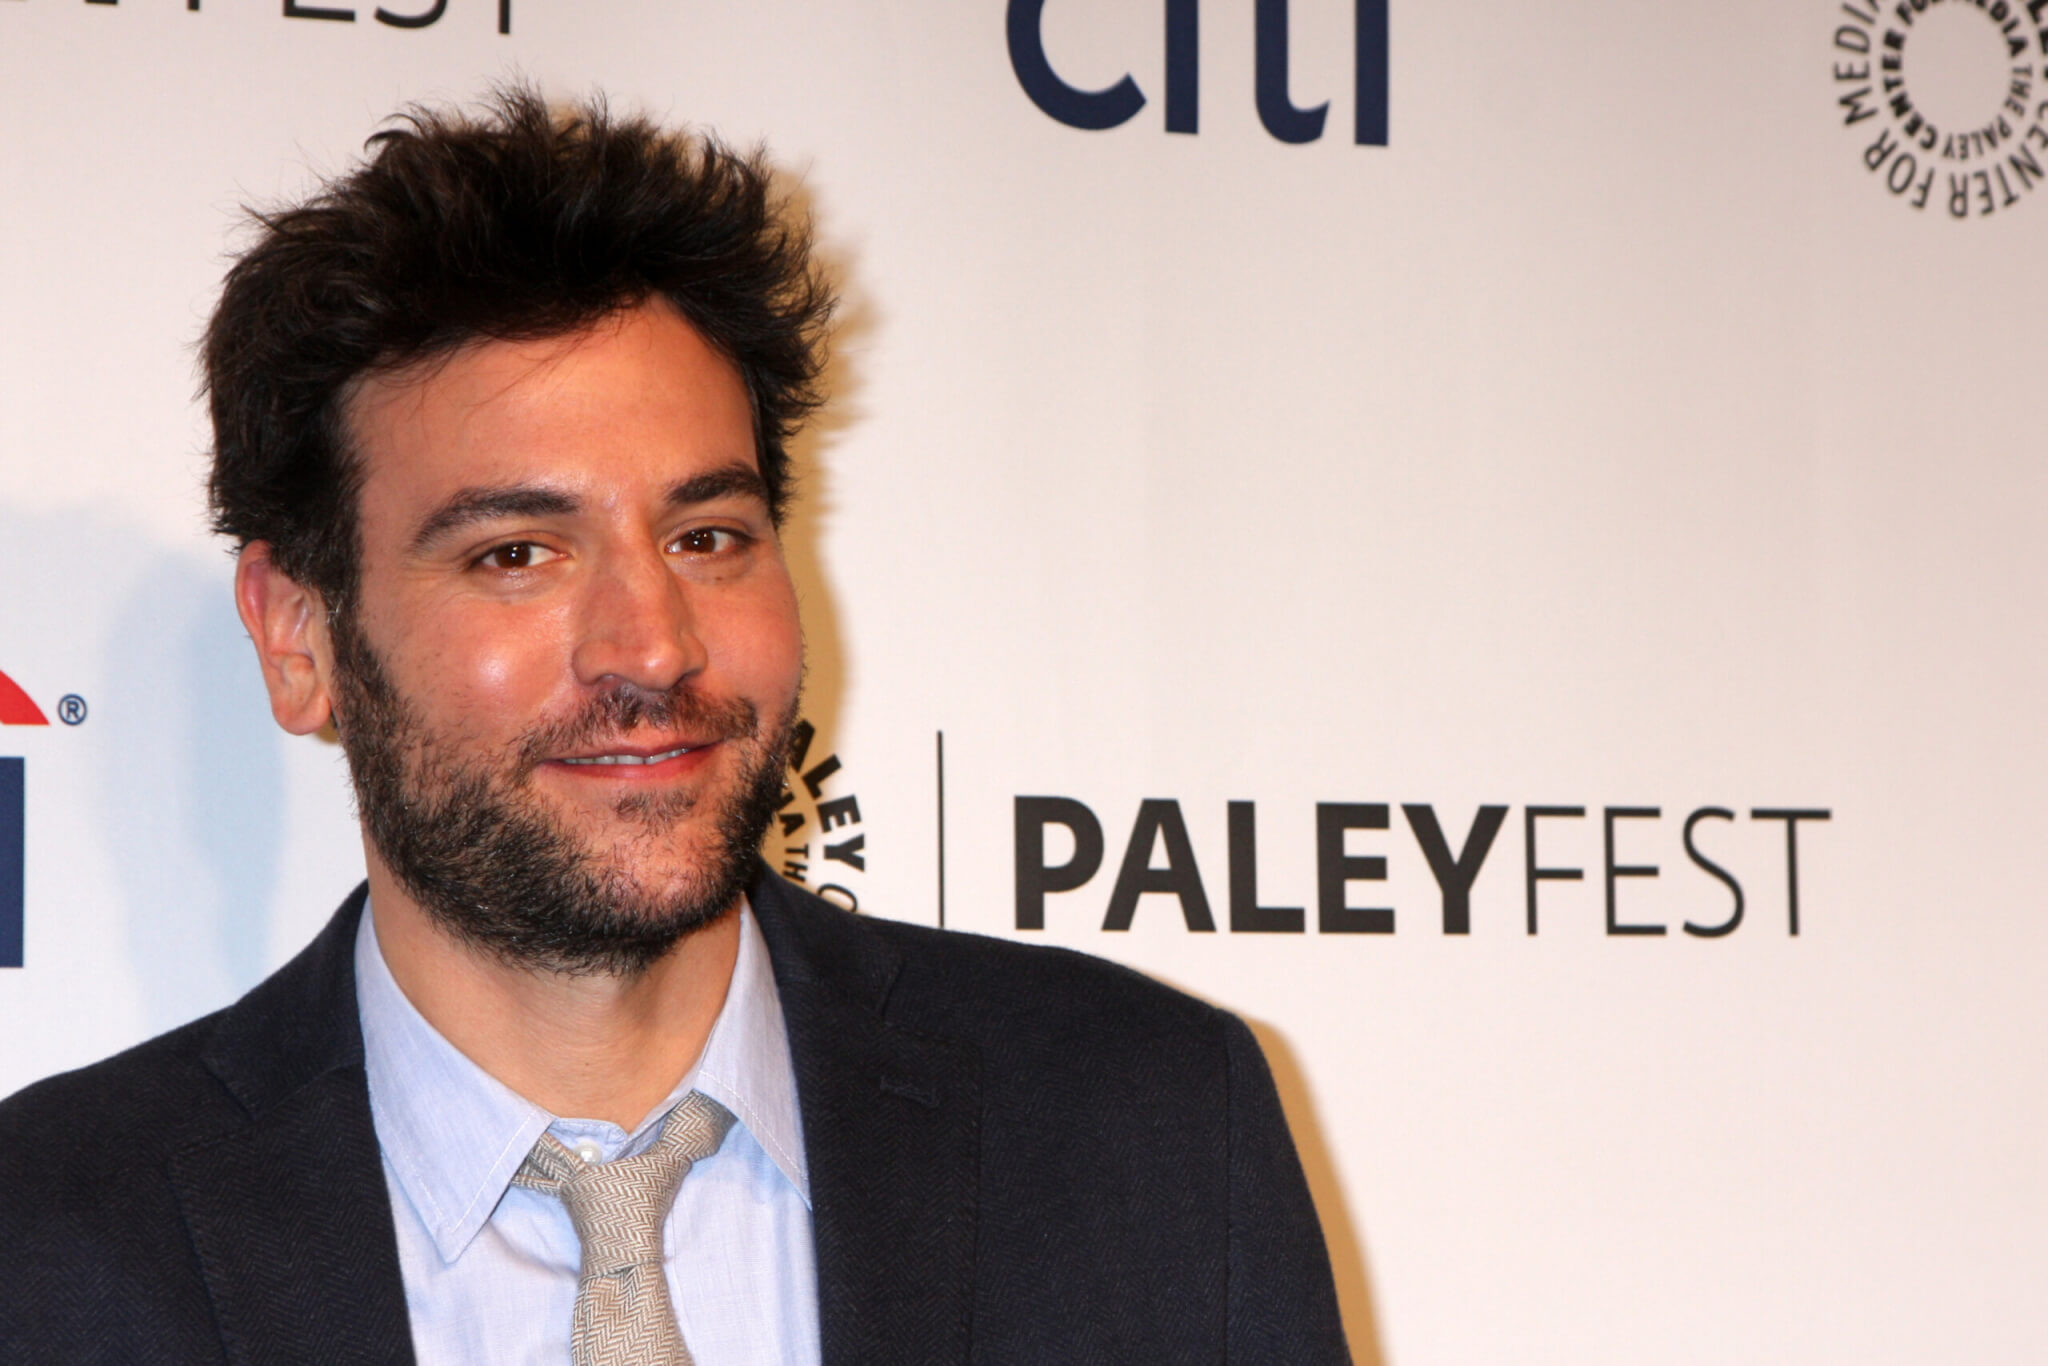 Josh Radnor at the "How I Met Your Mother" Series Farewell in 2014 